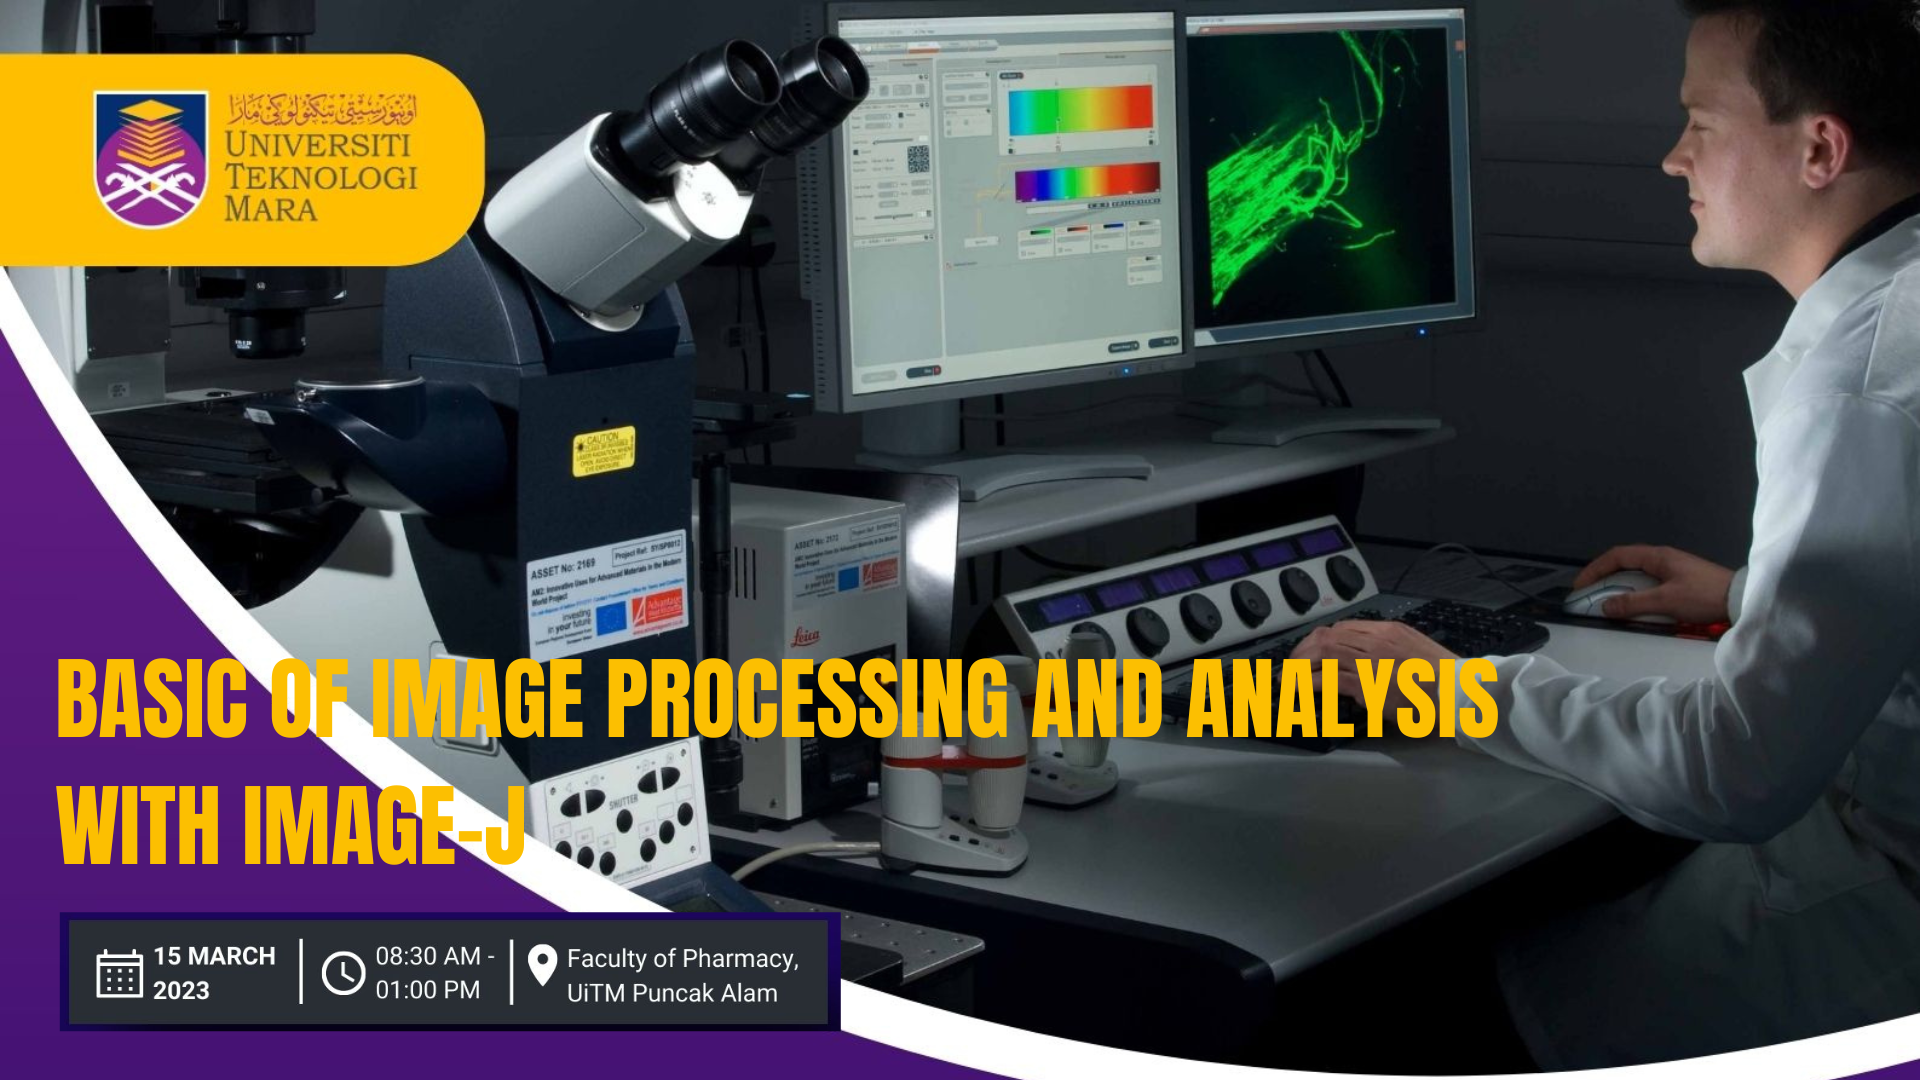 Basic of Image Processing and Analysis with Image-J